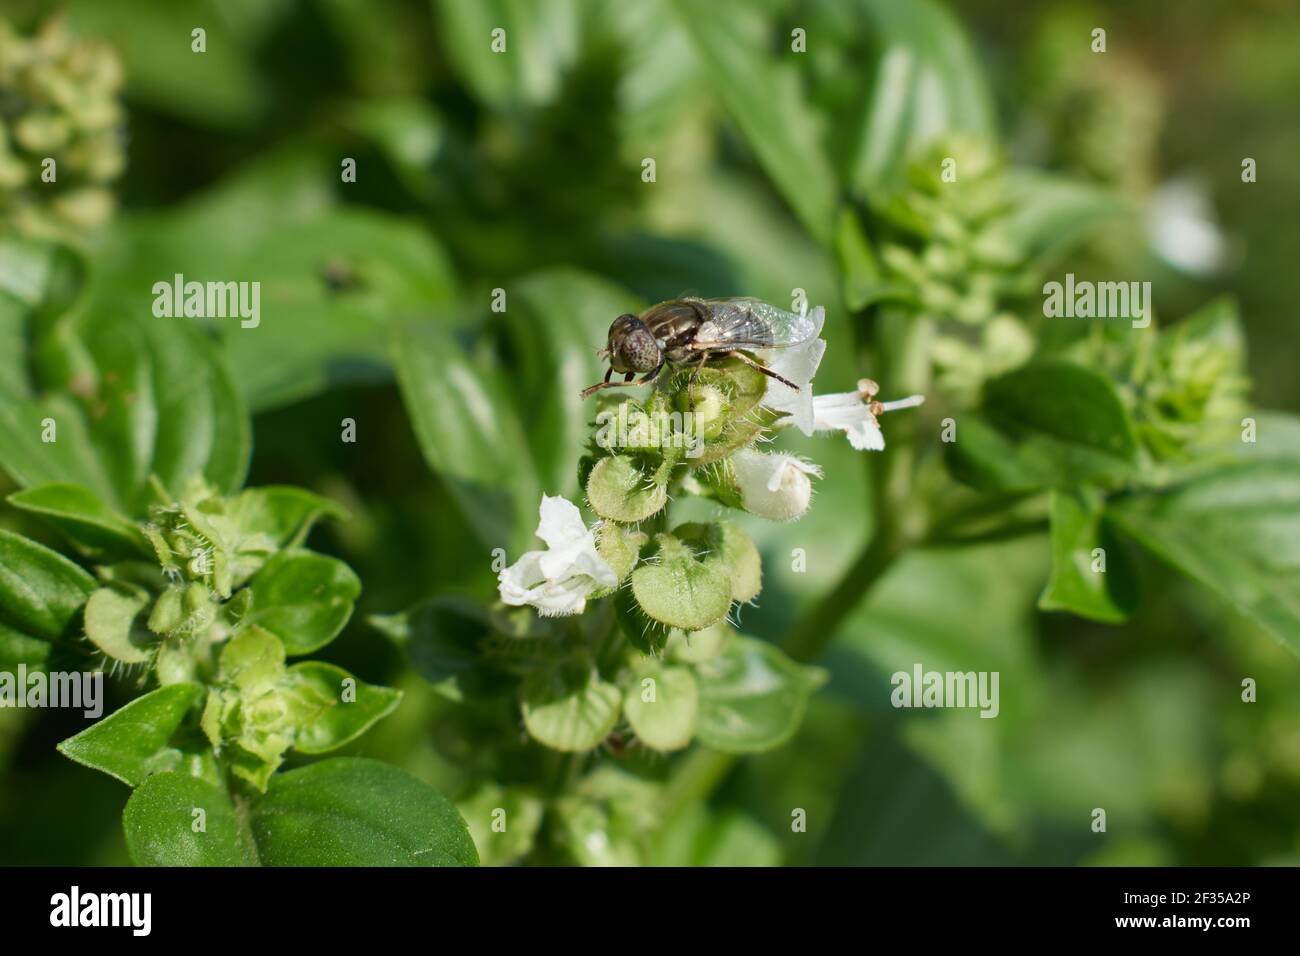 Wallpaper with an insect in nature Stock Photo